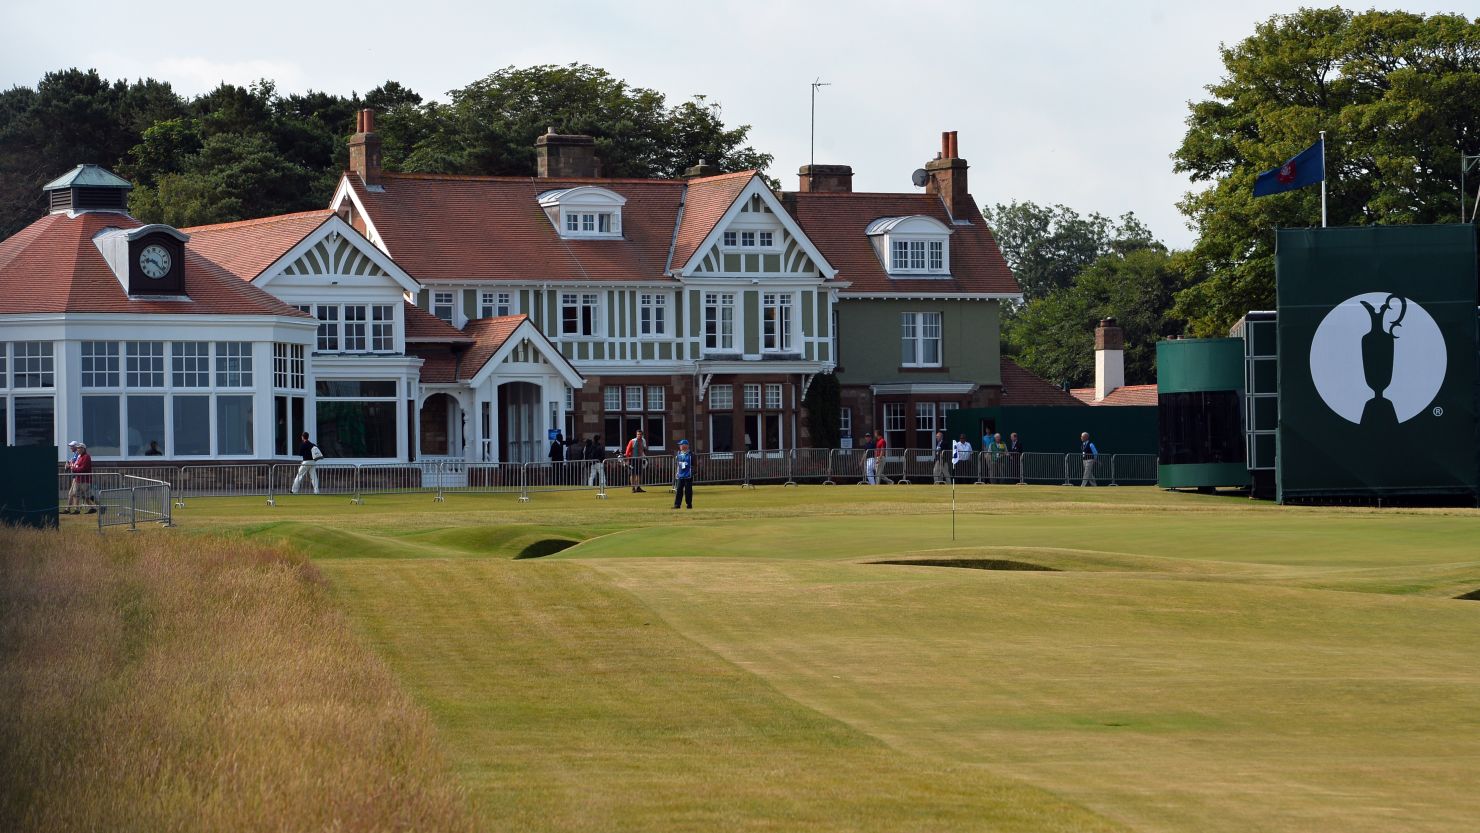 Muirfield has hosted Britain's prestigious Open Championship 16 times, most recently in 2013.